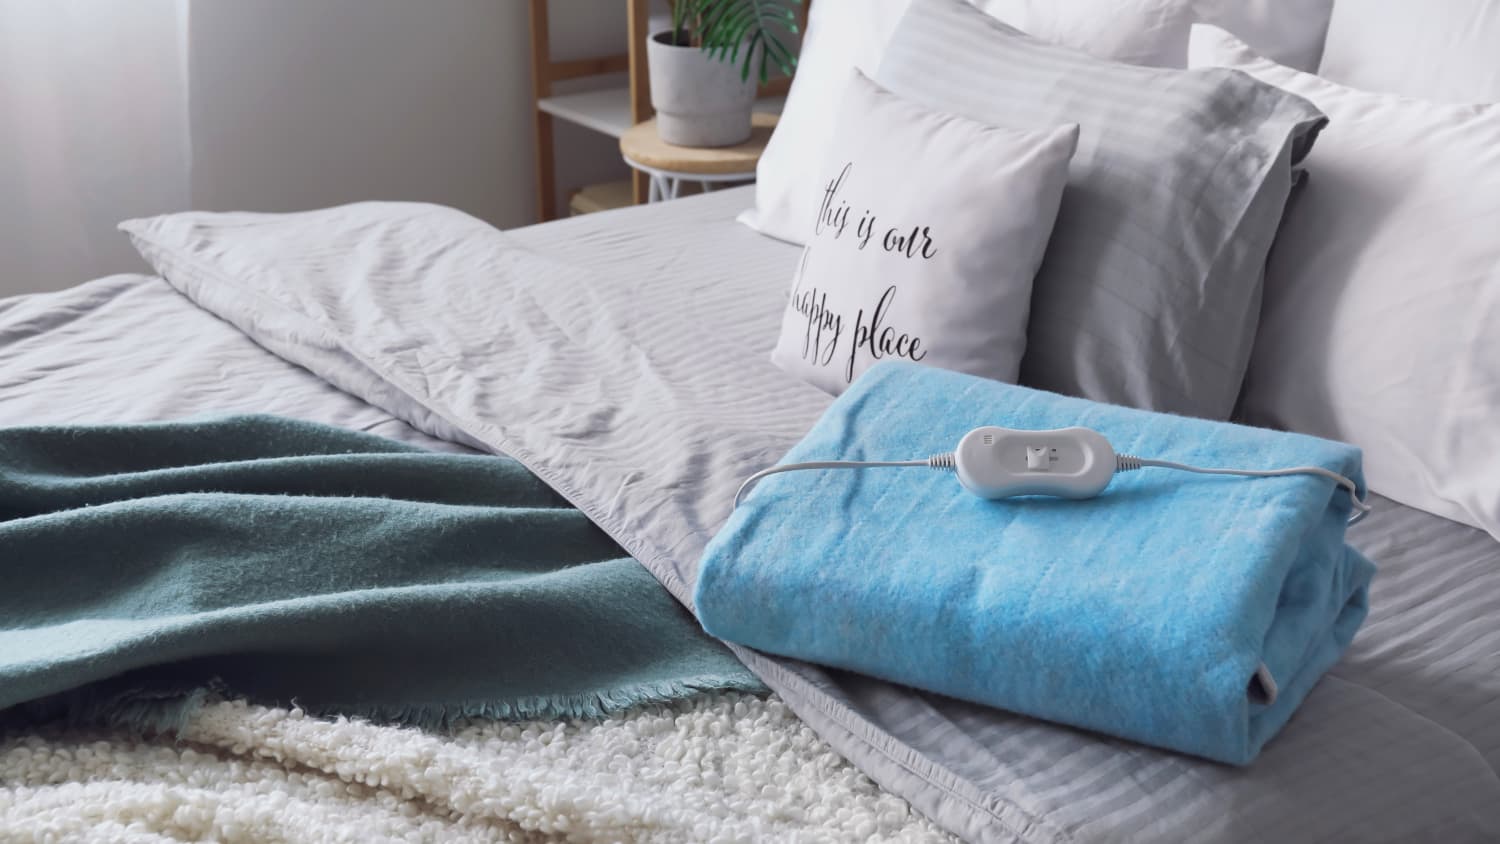 You've been using your electric blanket all wrong - six things you